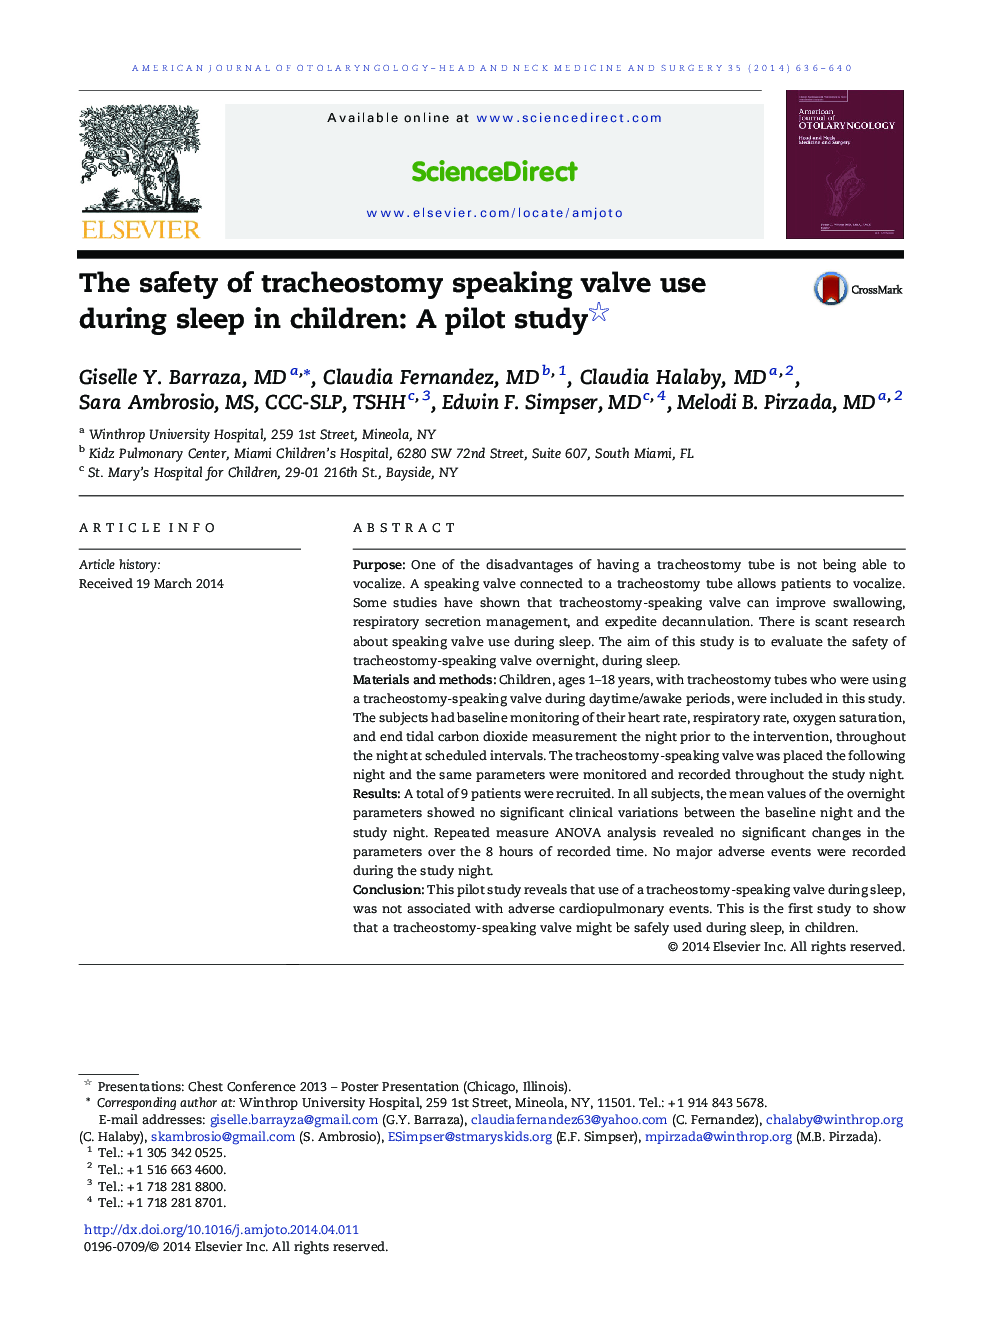 The safety of tracheostomy speaking valve use during sleep in children: A pilot study 